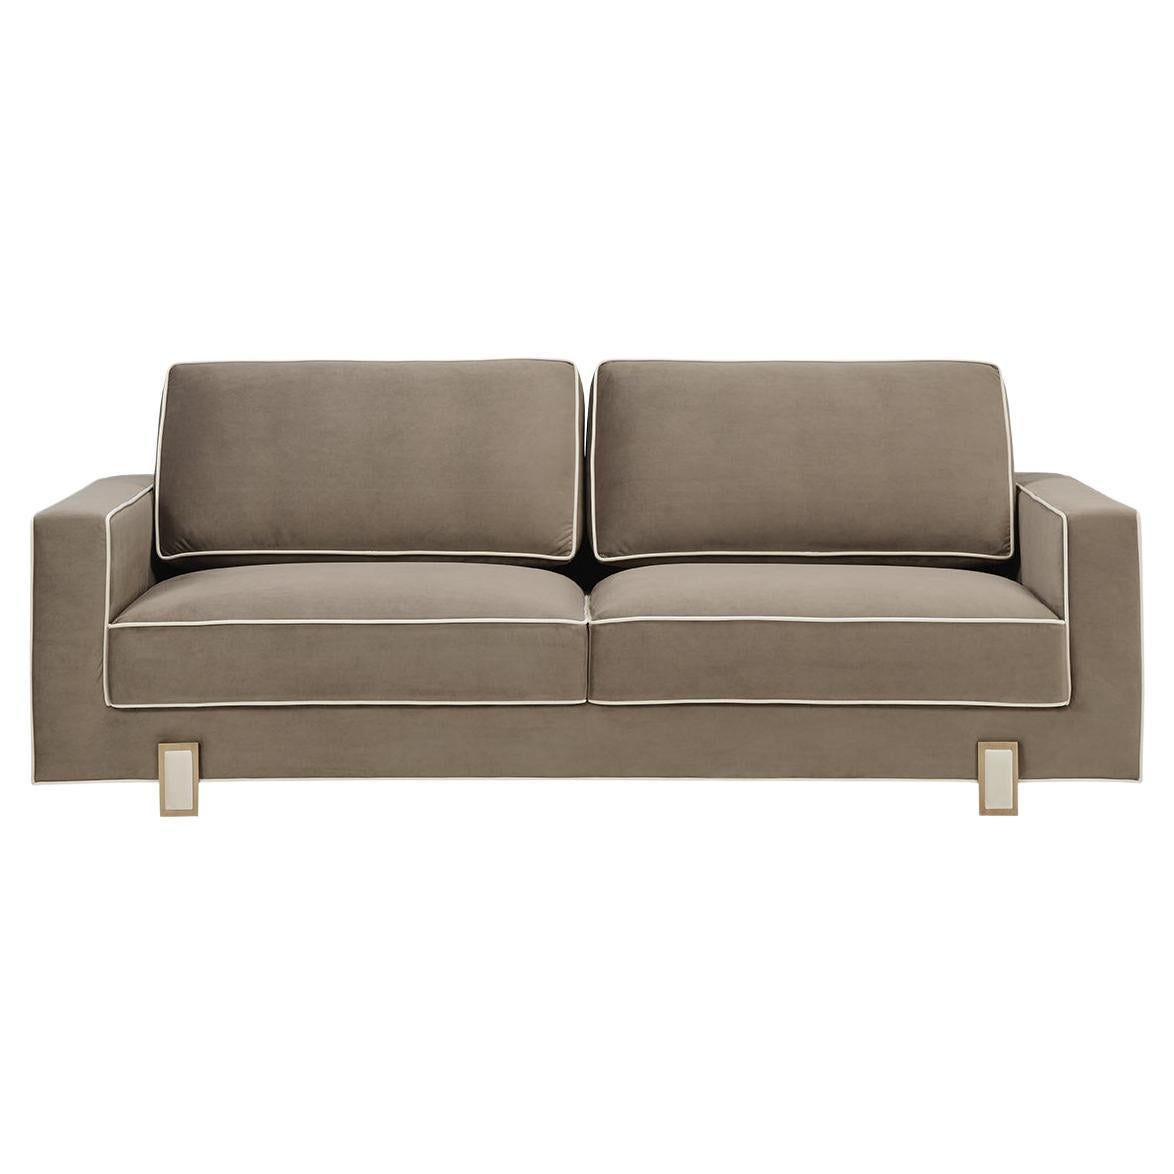 LUSO 2-seater sofa For Sale